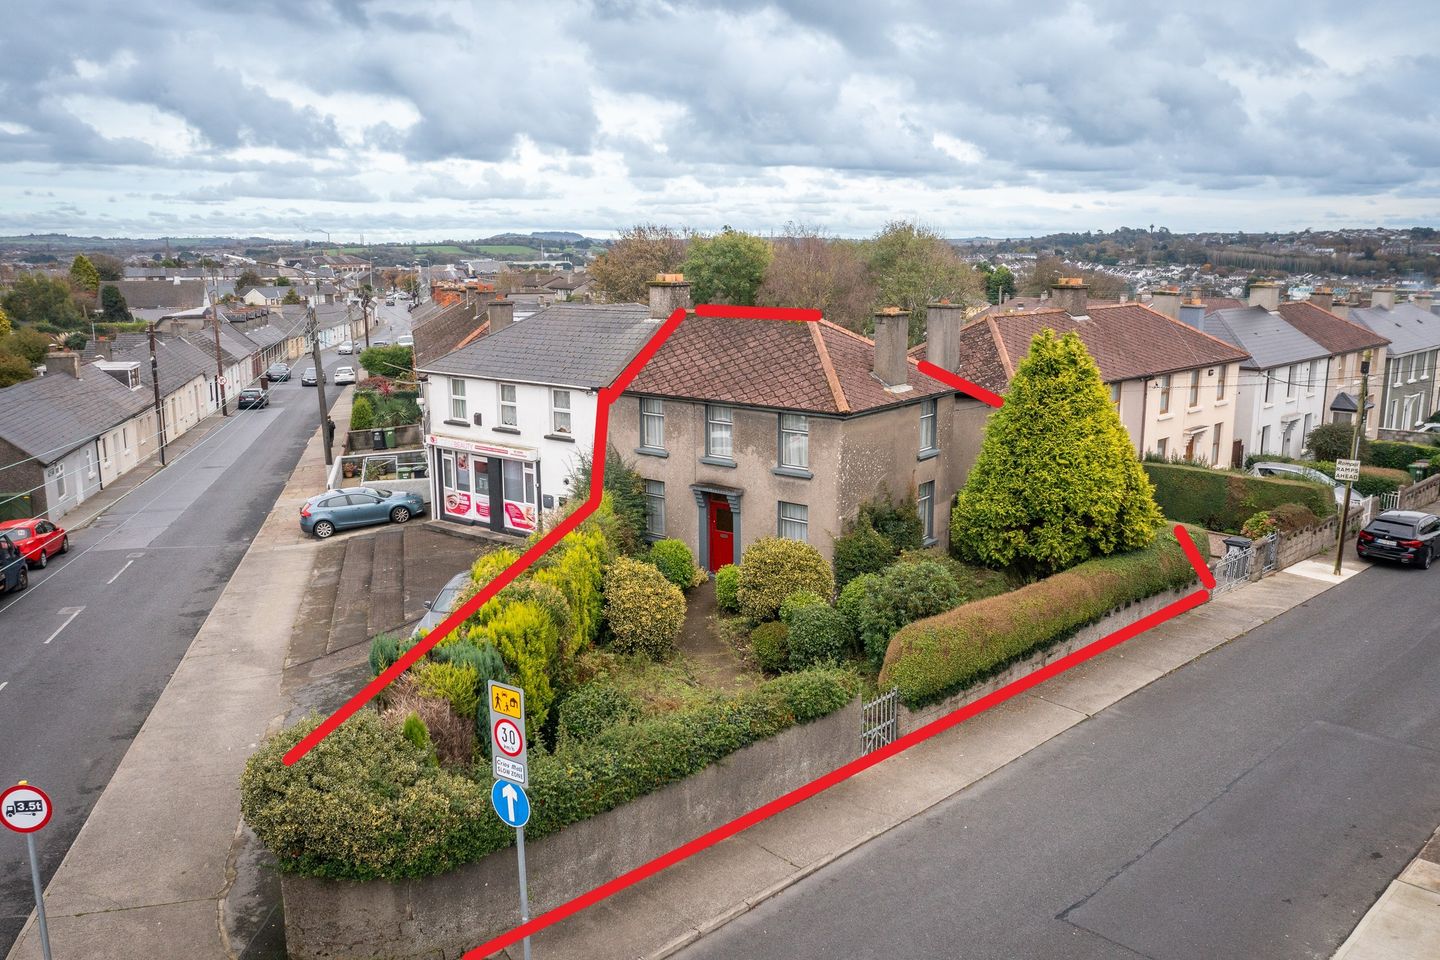 2 Bernard Place, Slievekeale, Waterford City, Co. Waterford, X91P28E